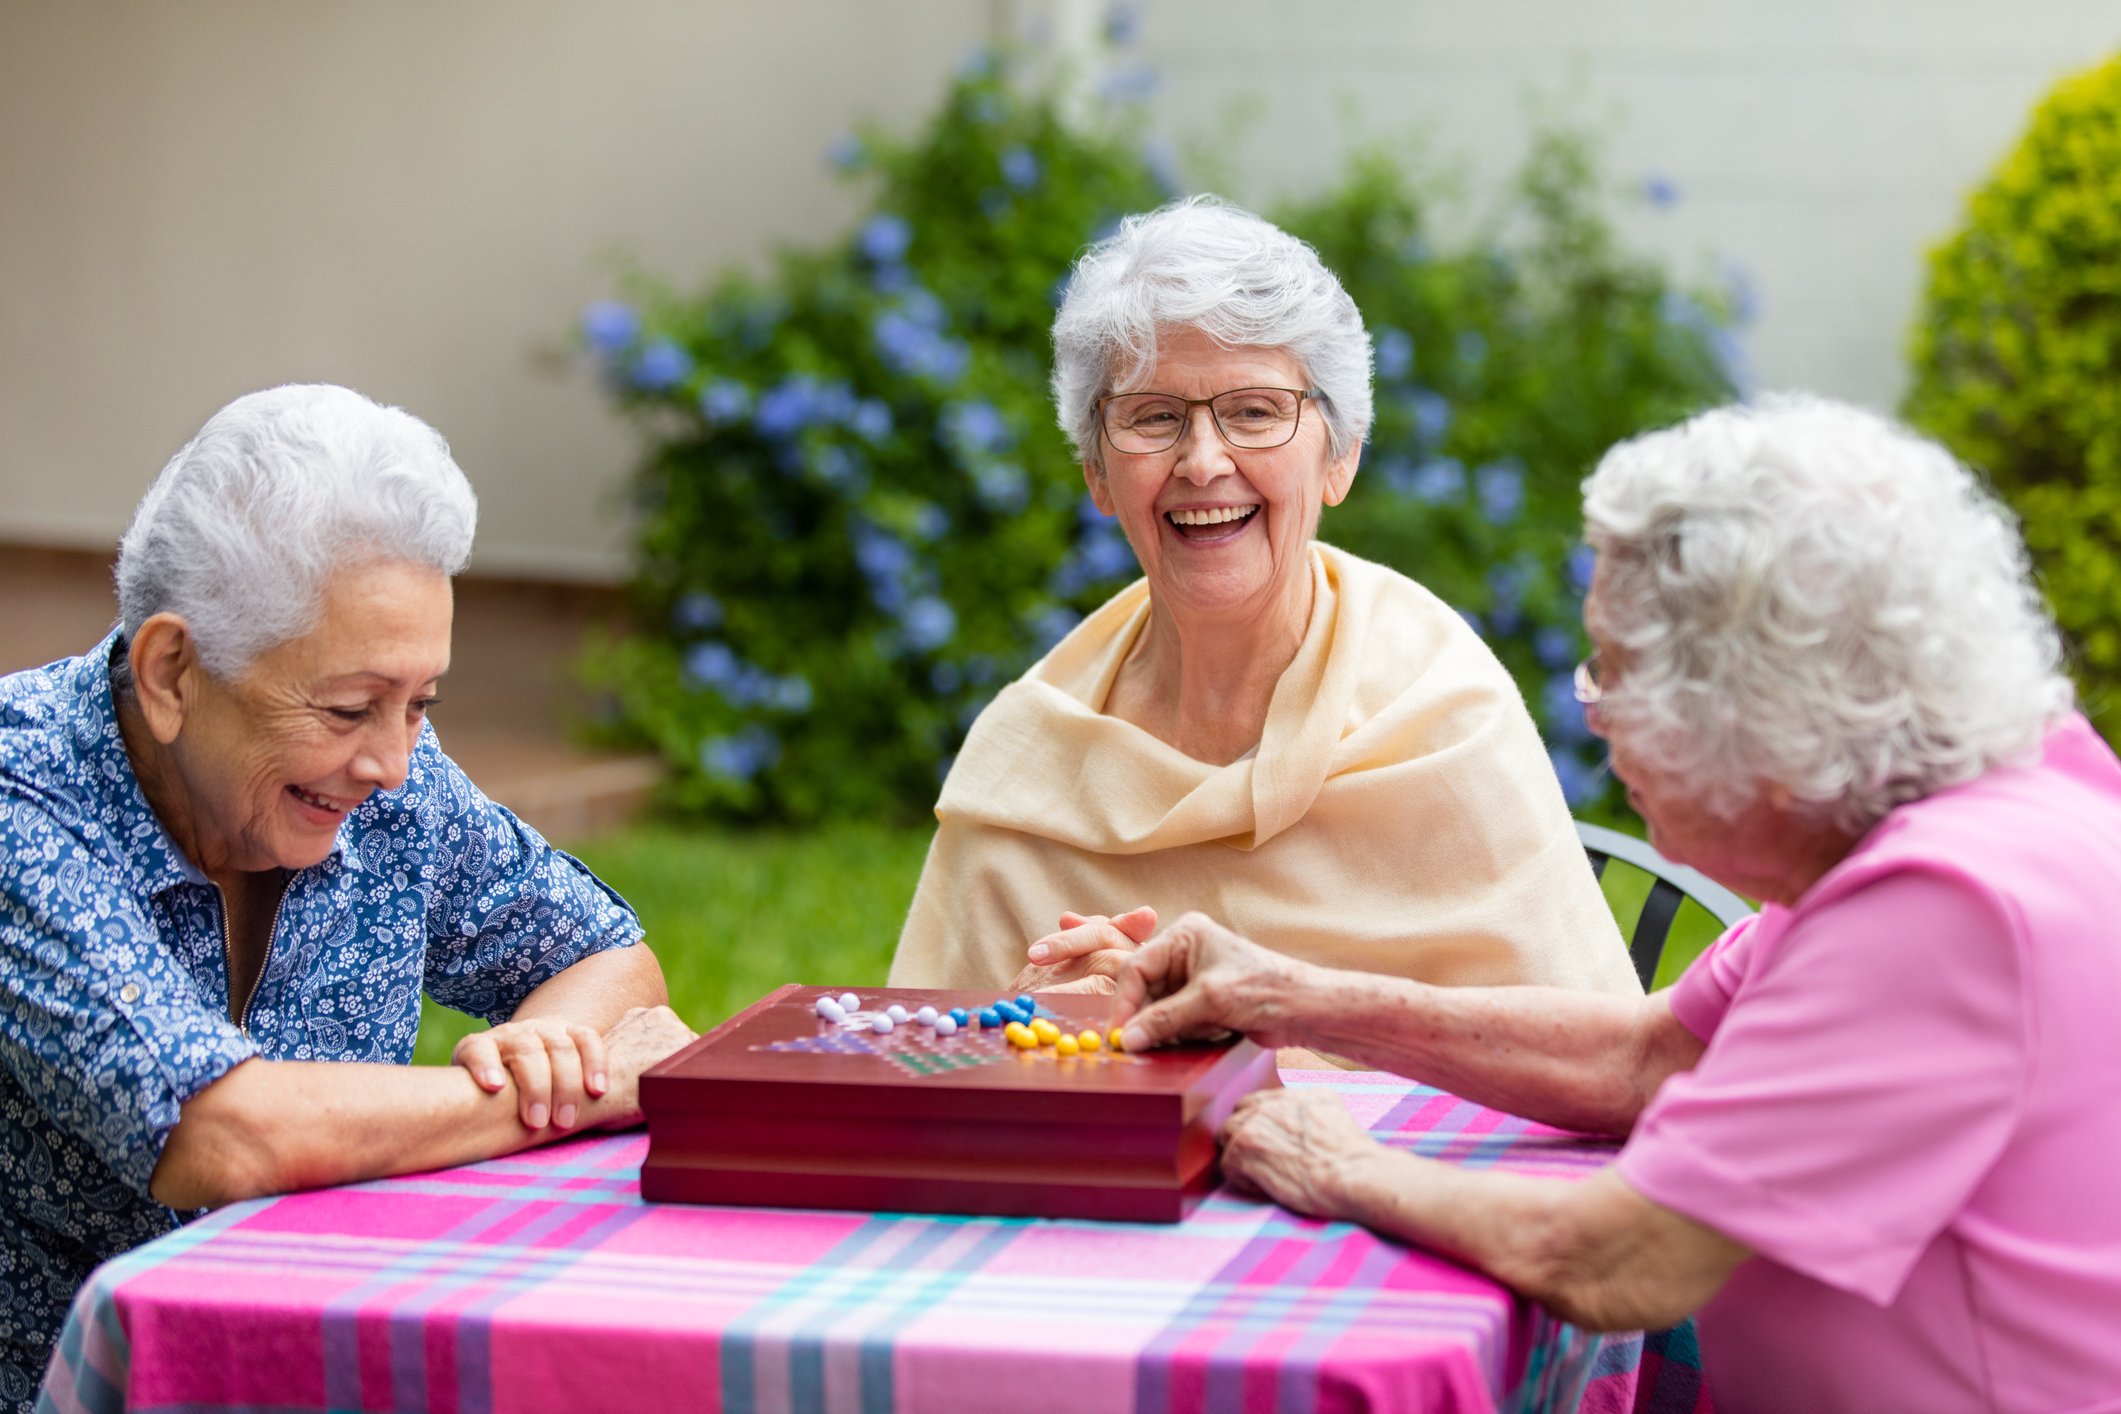 How to Choose Board Games for Dementia Patients